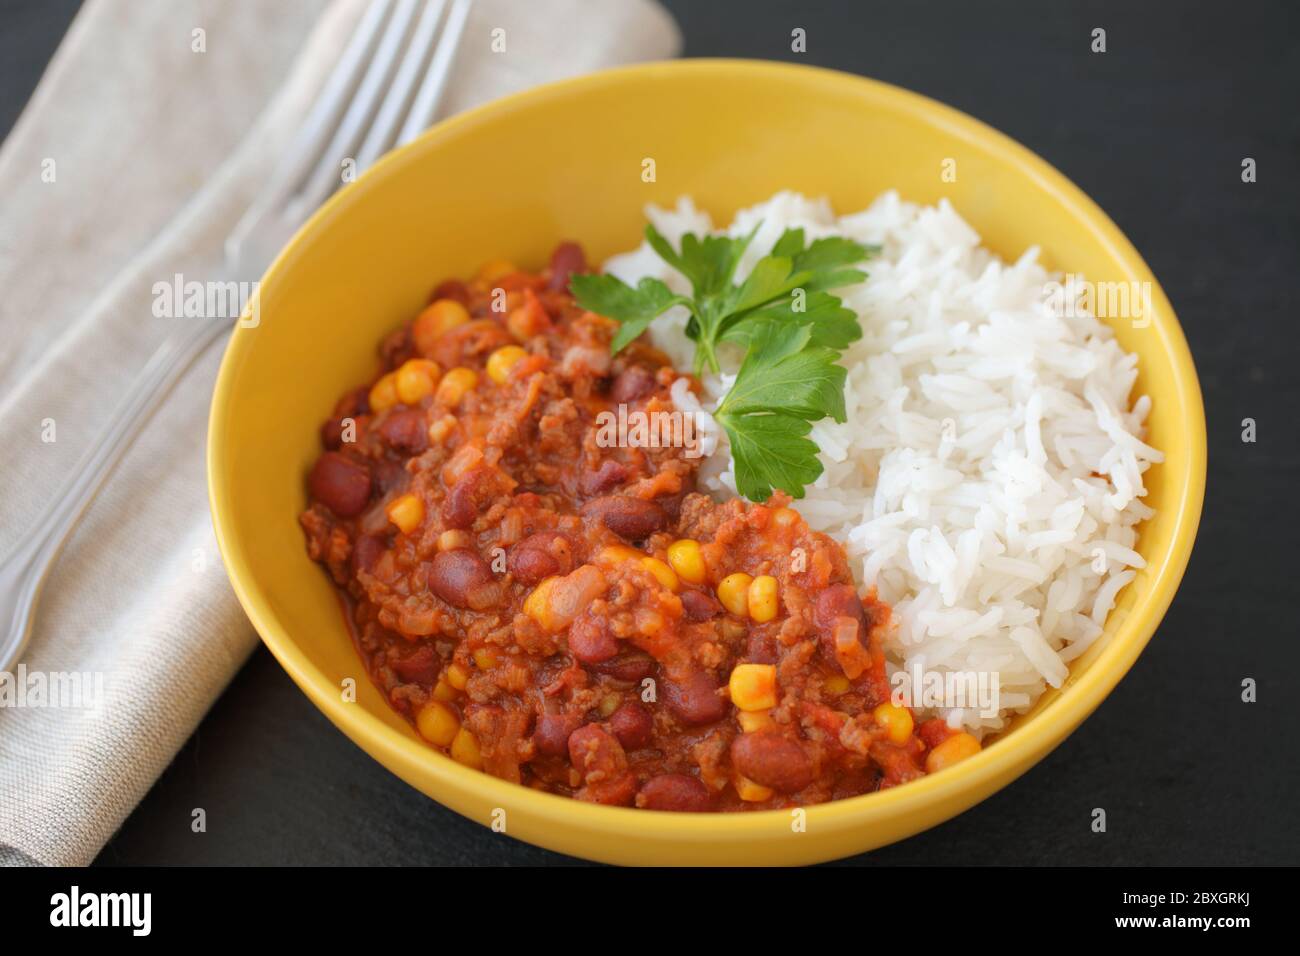 Chili con carne with long-grained rice decorated with a leaf of parsley closeup Stock Photo